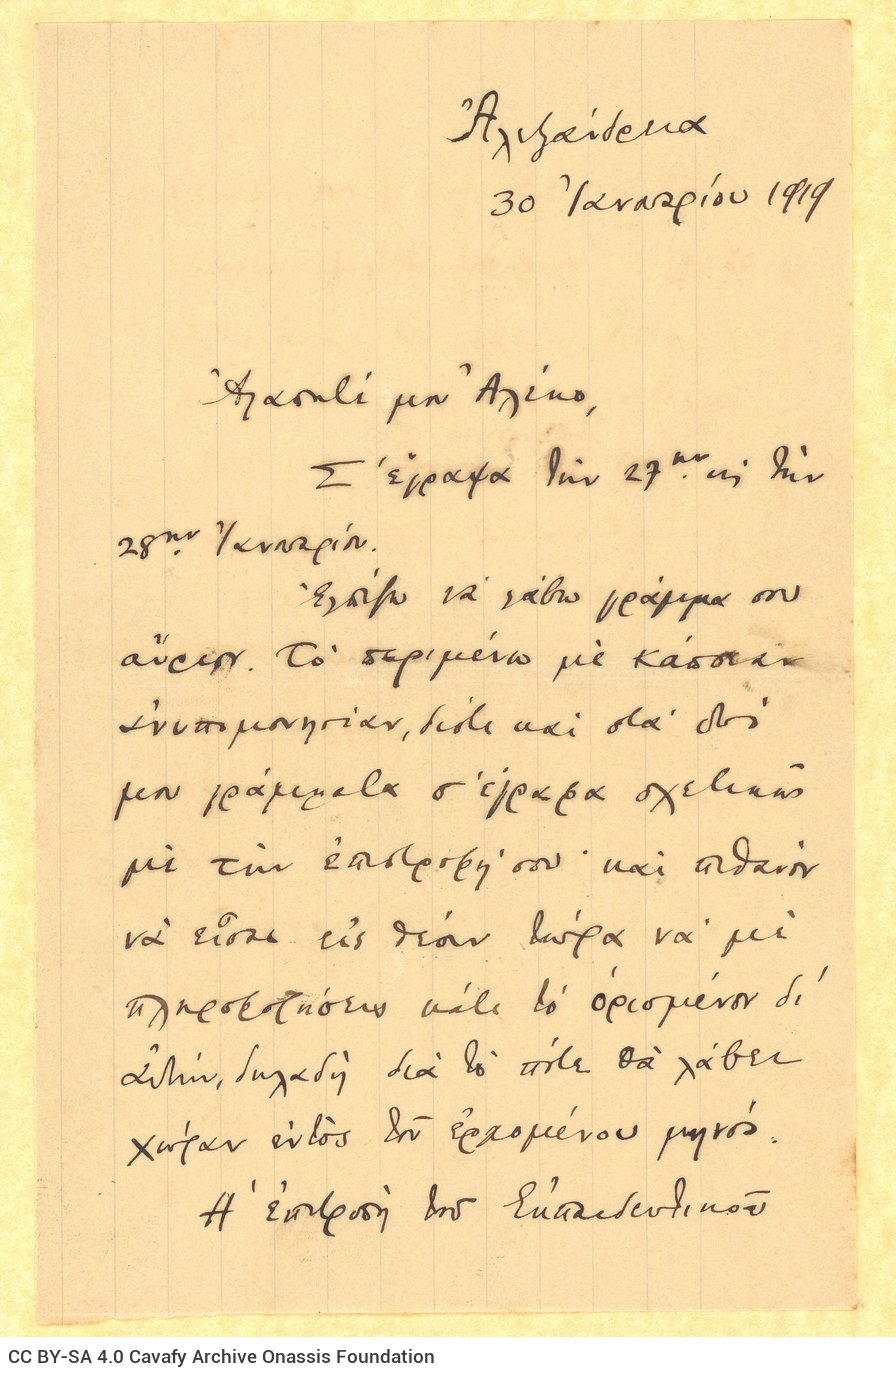 Handwritten letter by Cavafy to Alekos Singopoulo on one side of four sheets. The other sides are blank. Page numbers are 